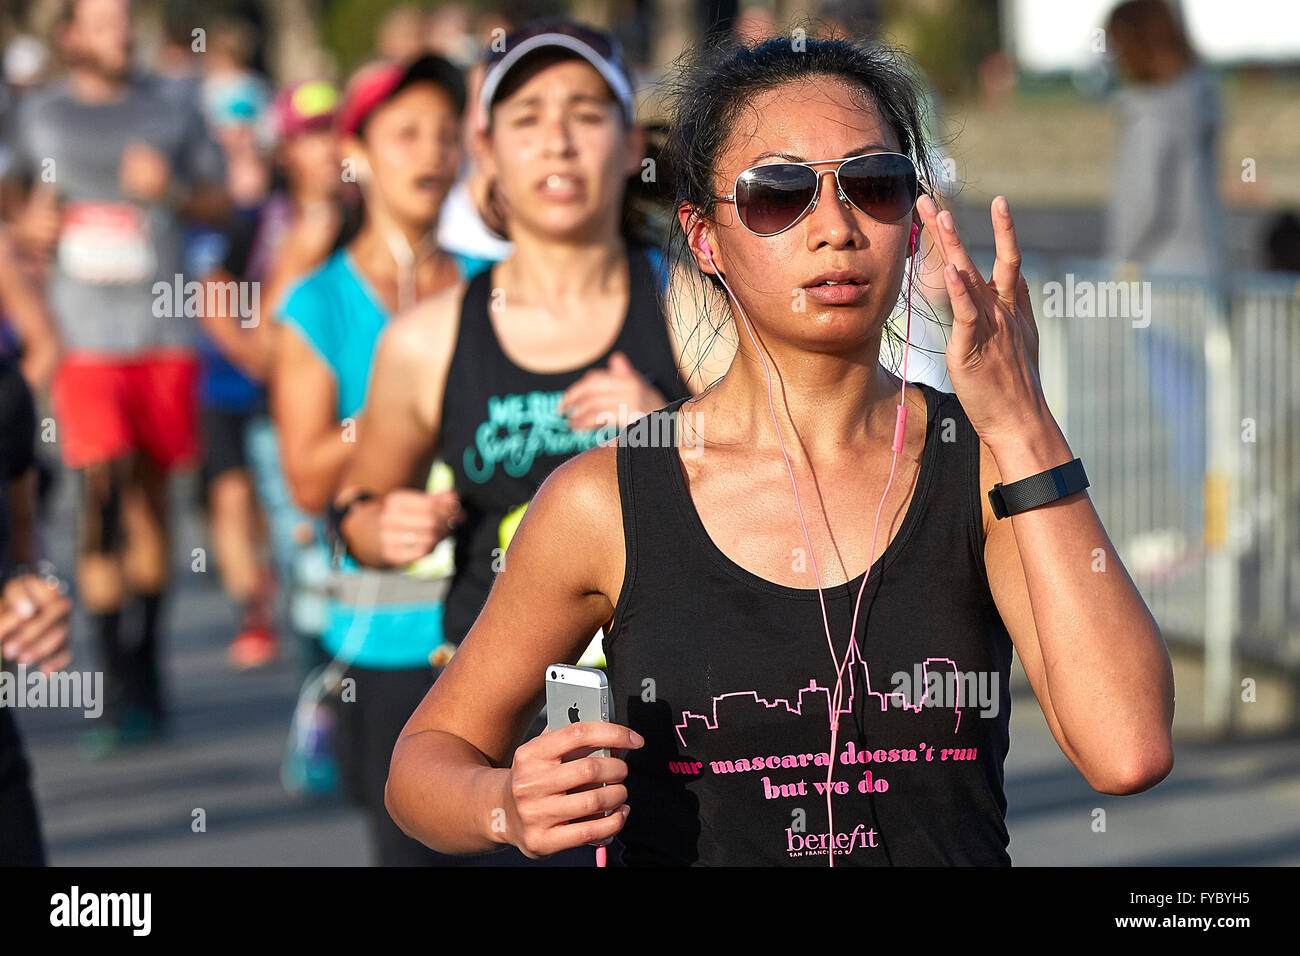 Committed Asian Female Athlete Running In The Nike Woman's Half Marathon,  San Francisco, 2015 Stock Photo - Alamy